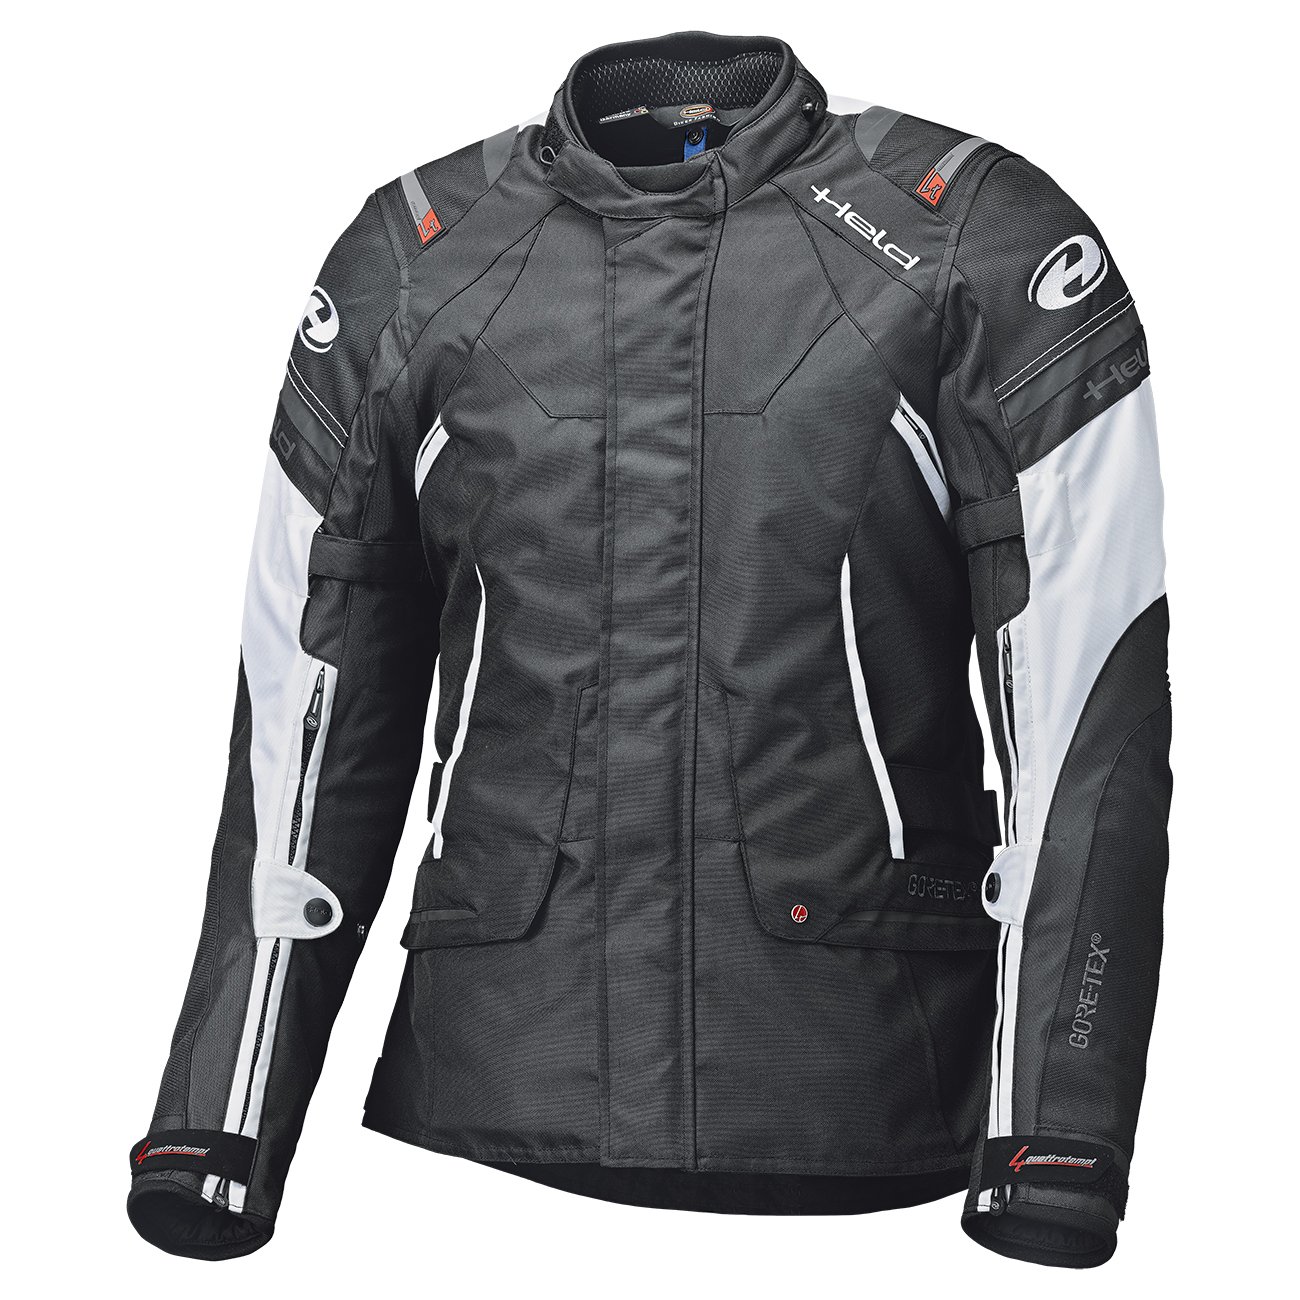 Image of Held Molto GTX Jacket Black White Size S ID 4049462820913